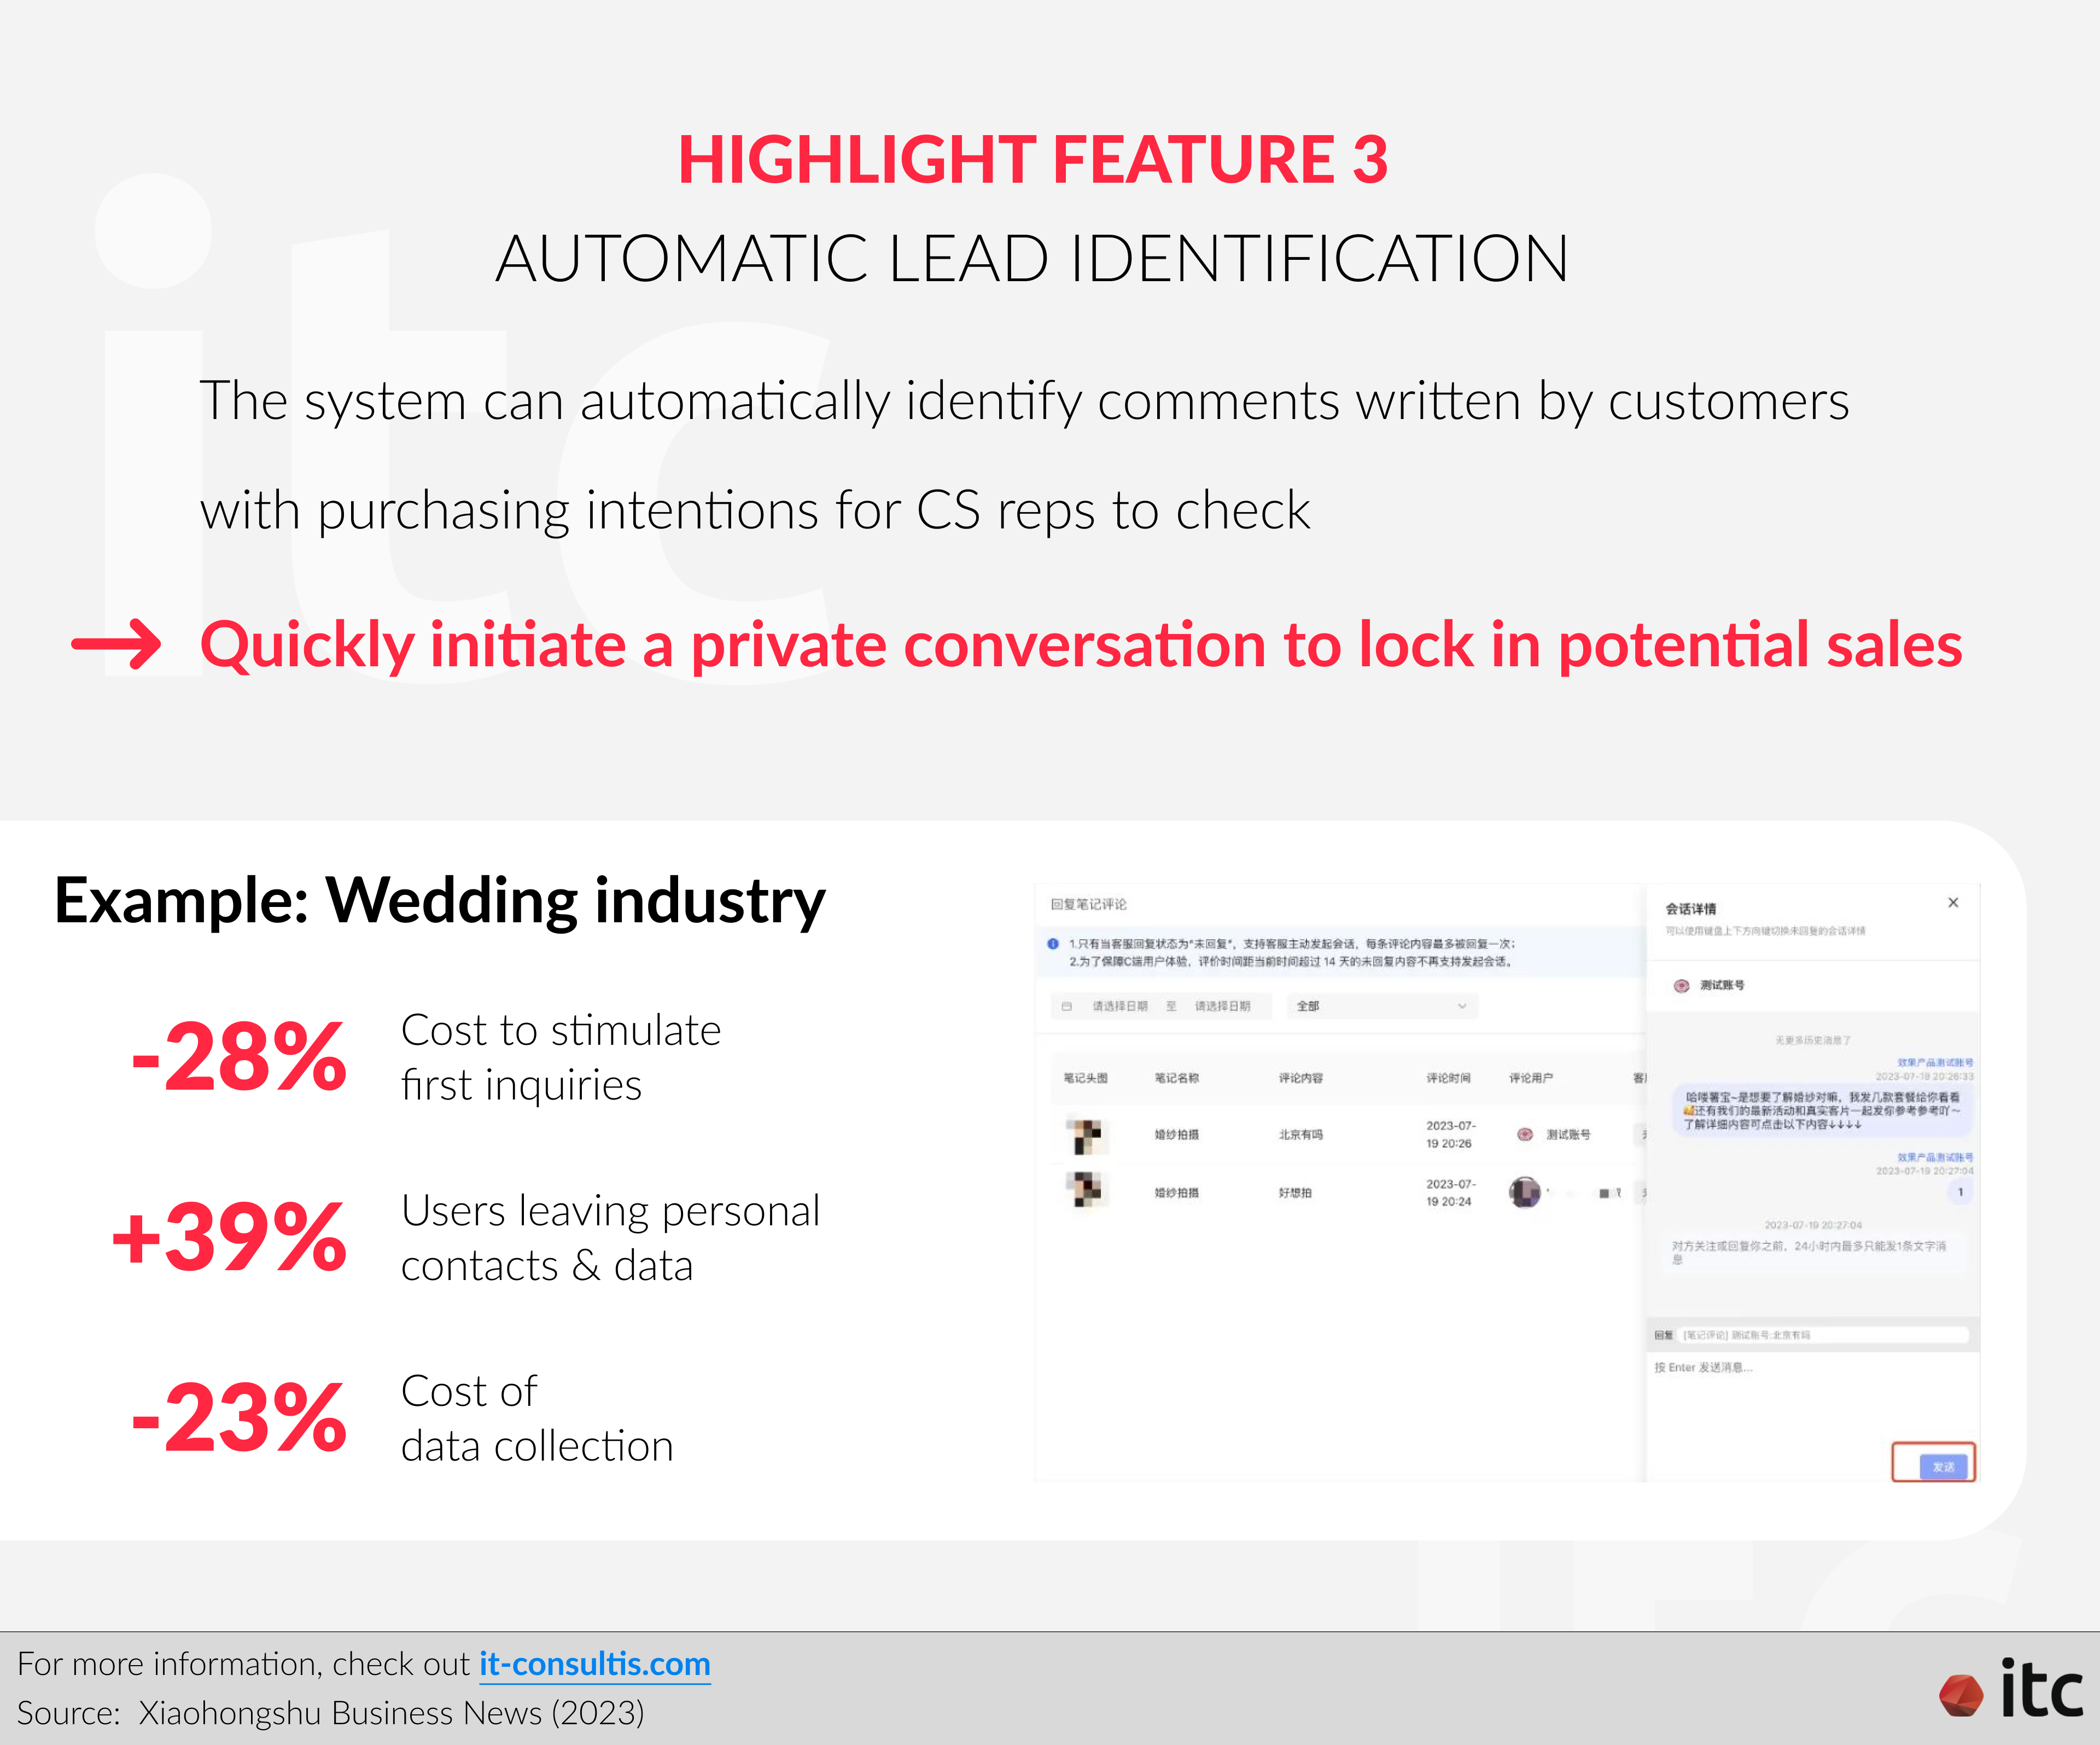 Xiaohongshu private message highlight feature 3: Automatic Lead Identification